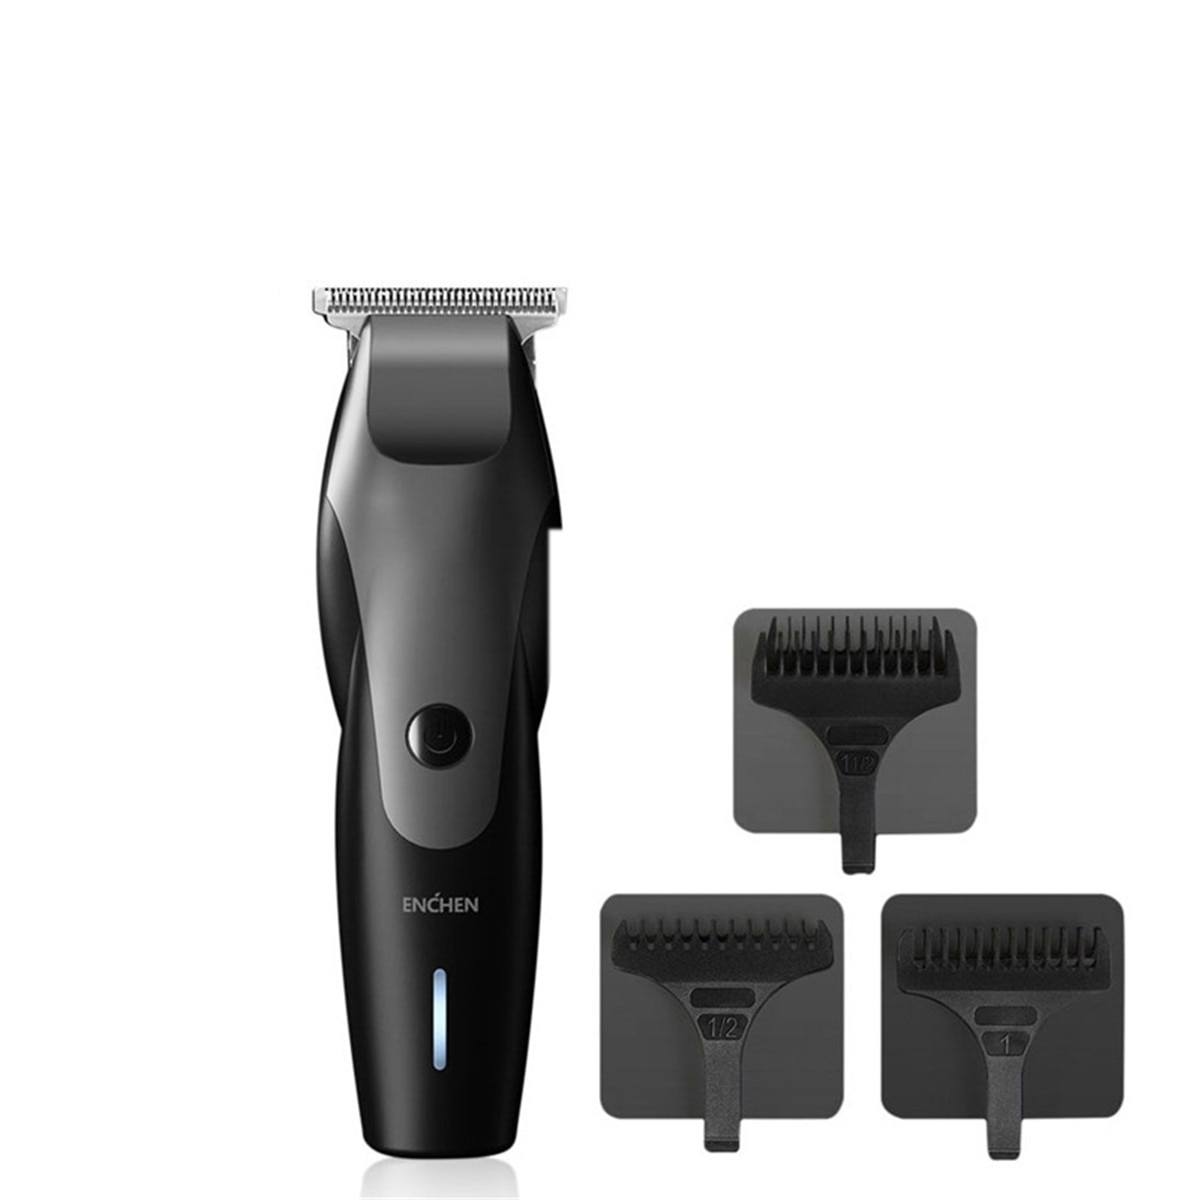 Original Xiaomi Youpin ENCHEN Hummingbird Electric Hair Clipper Razor Low Noise Hair Trimmer for Adult for Men